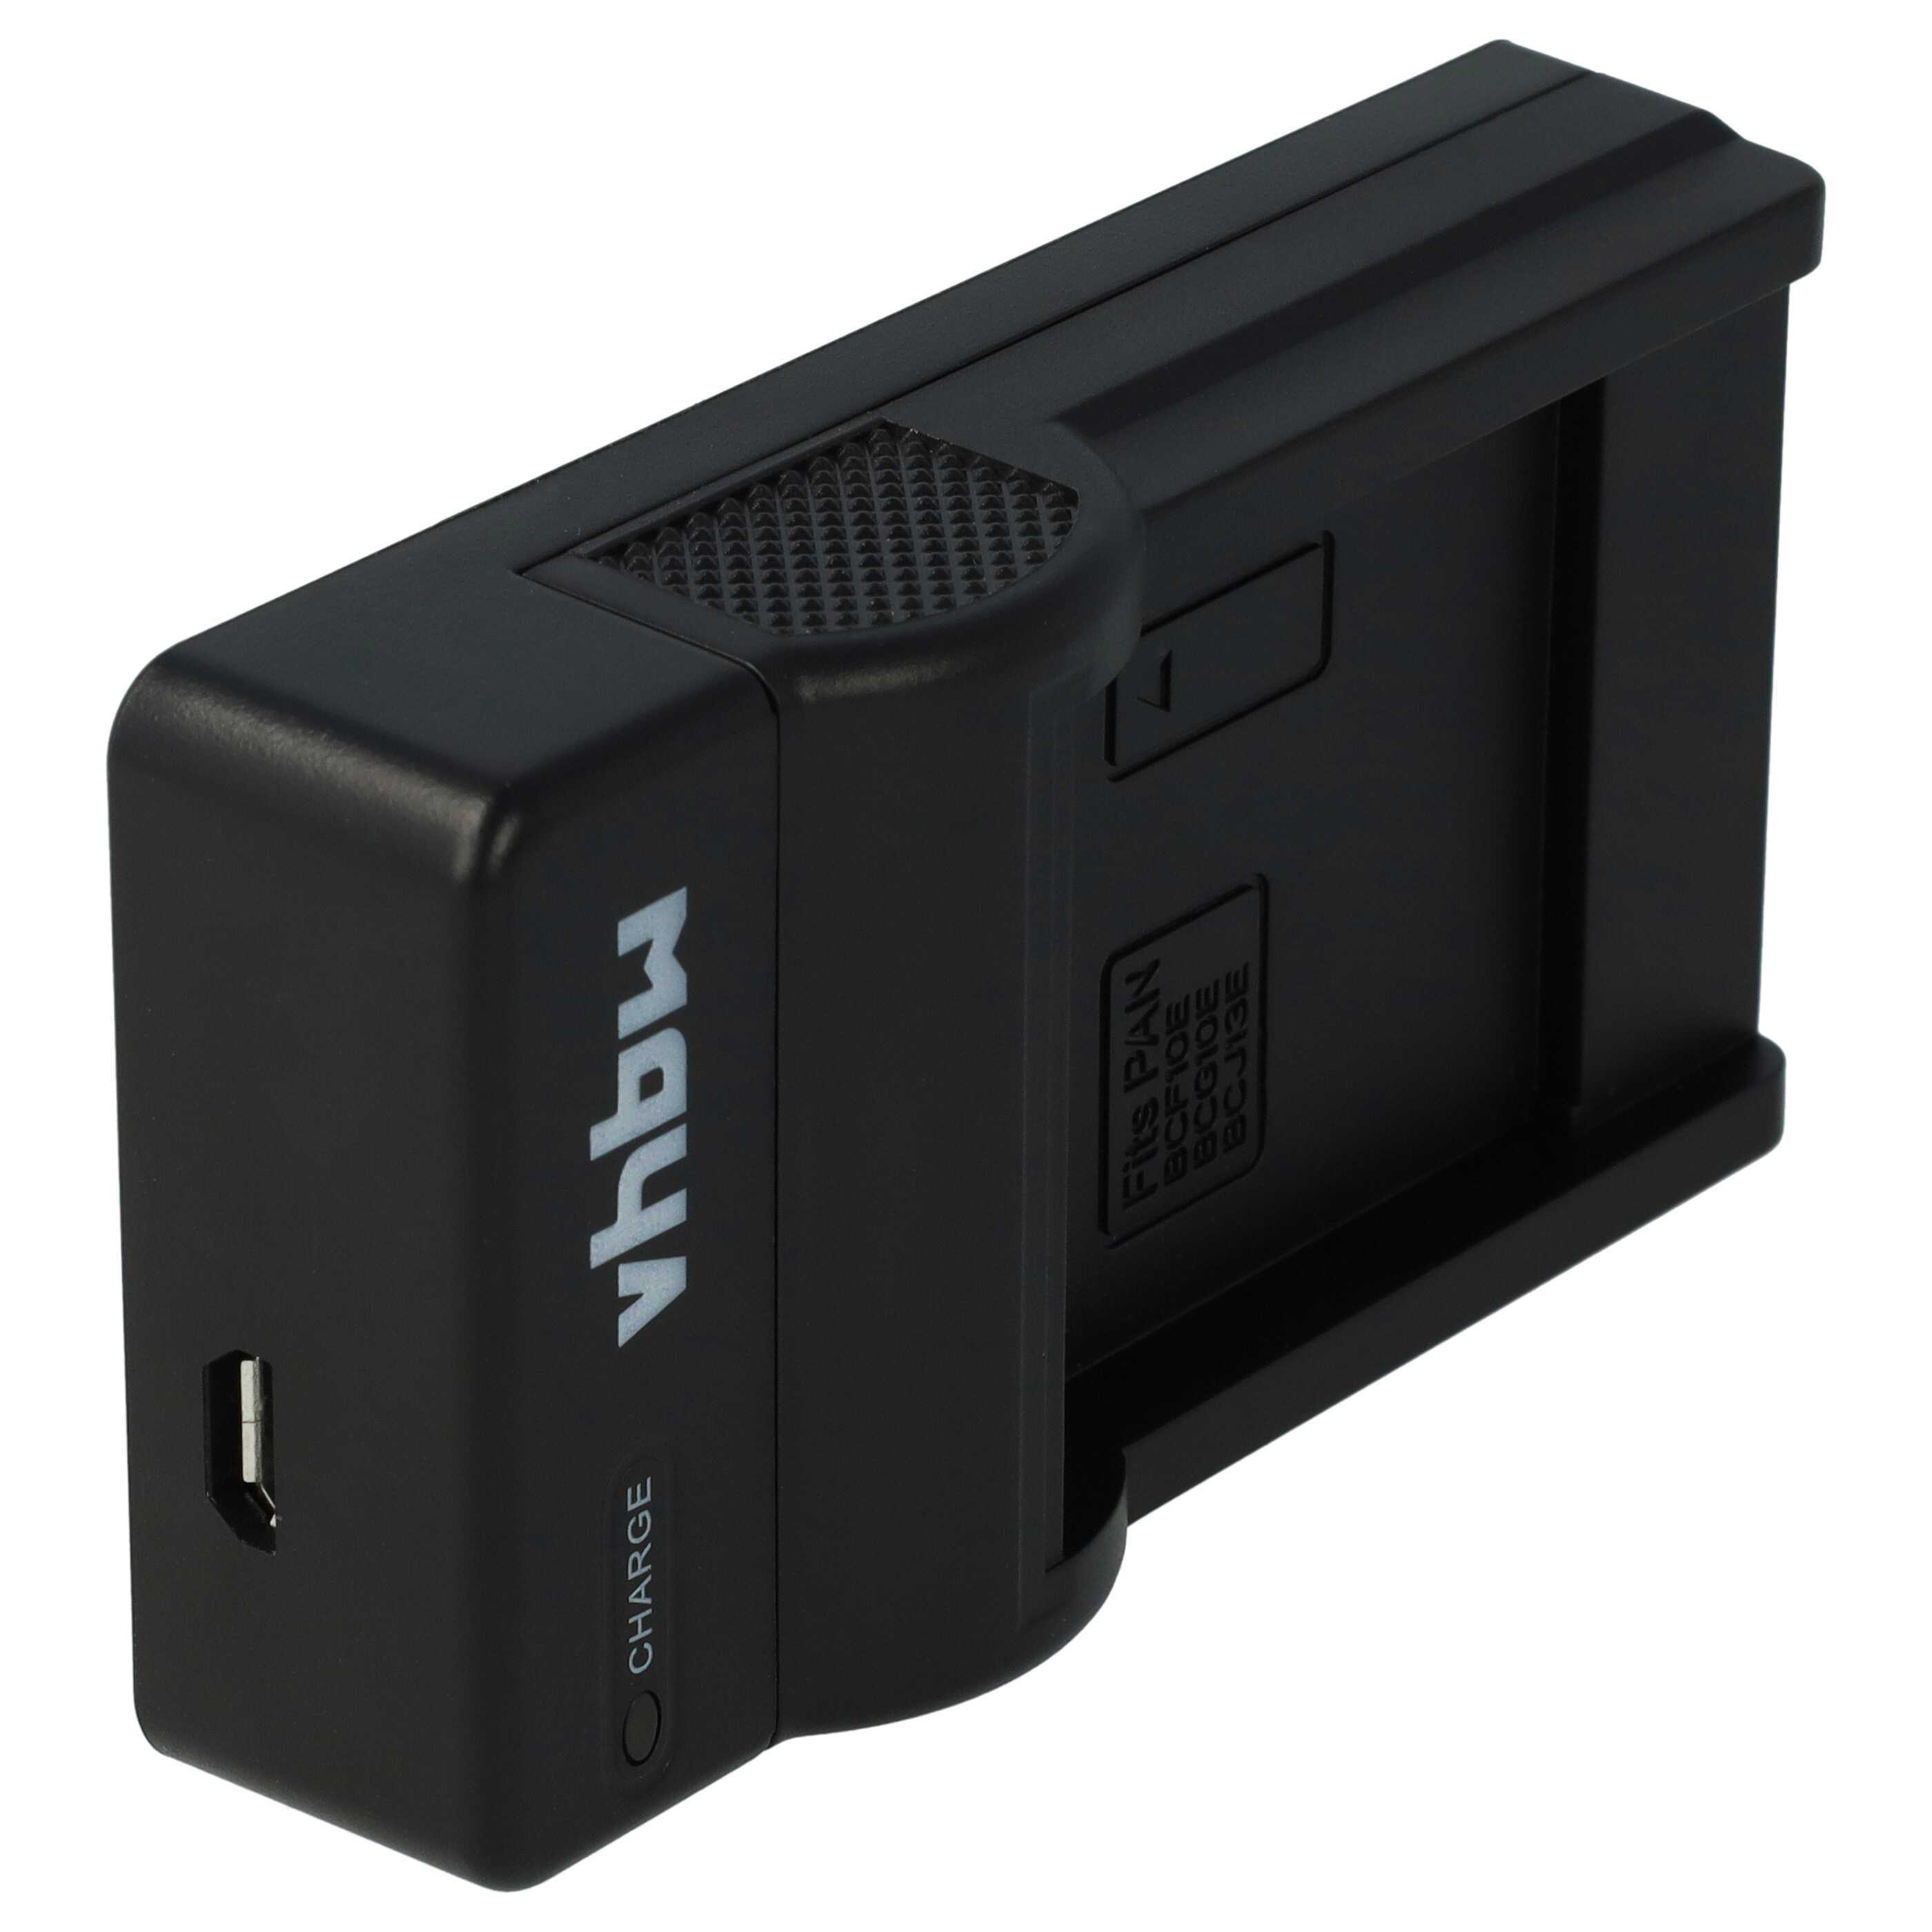 Battery Charger suitable for V-Lux 20 Camera etc. - 0.5 A, 4.2 V